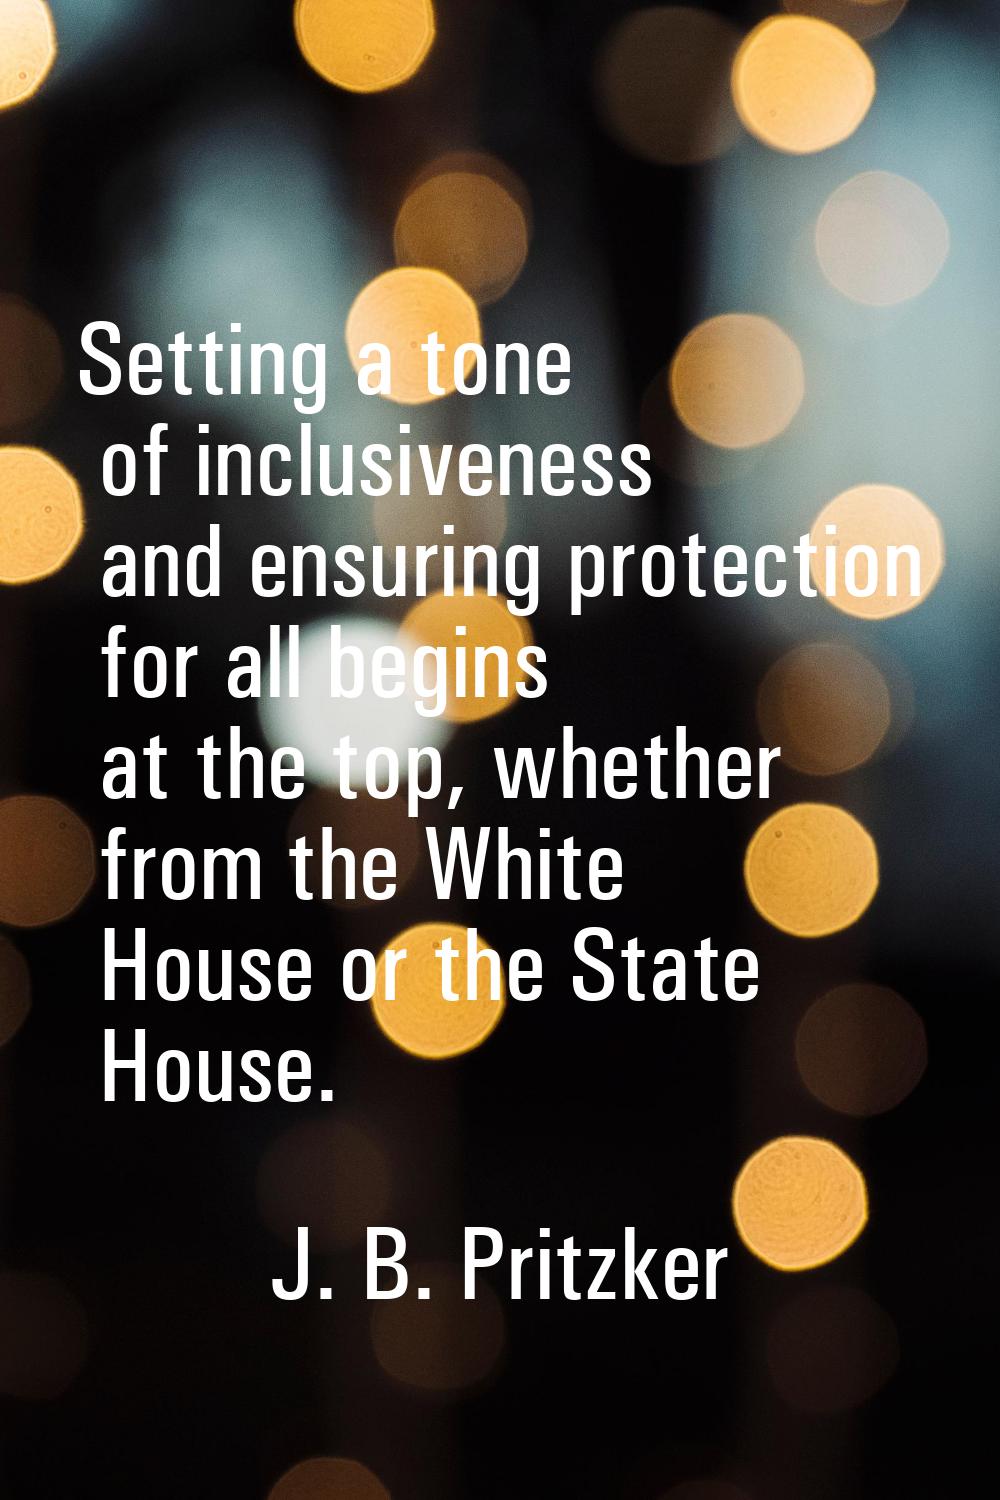 Setting a tone of inclusiveness and ensuring protection for all begins at the top, whether from the